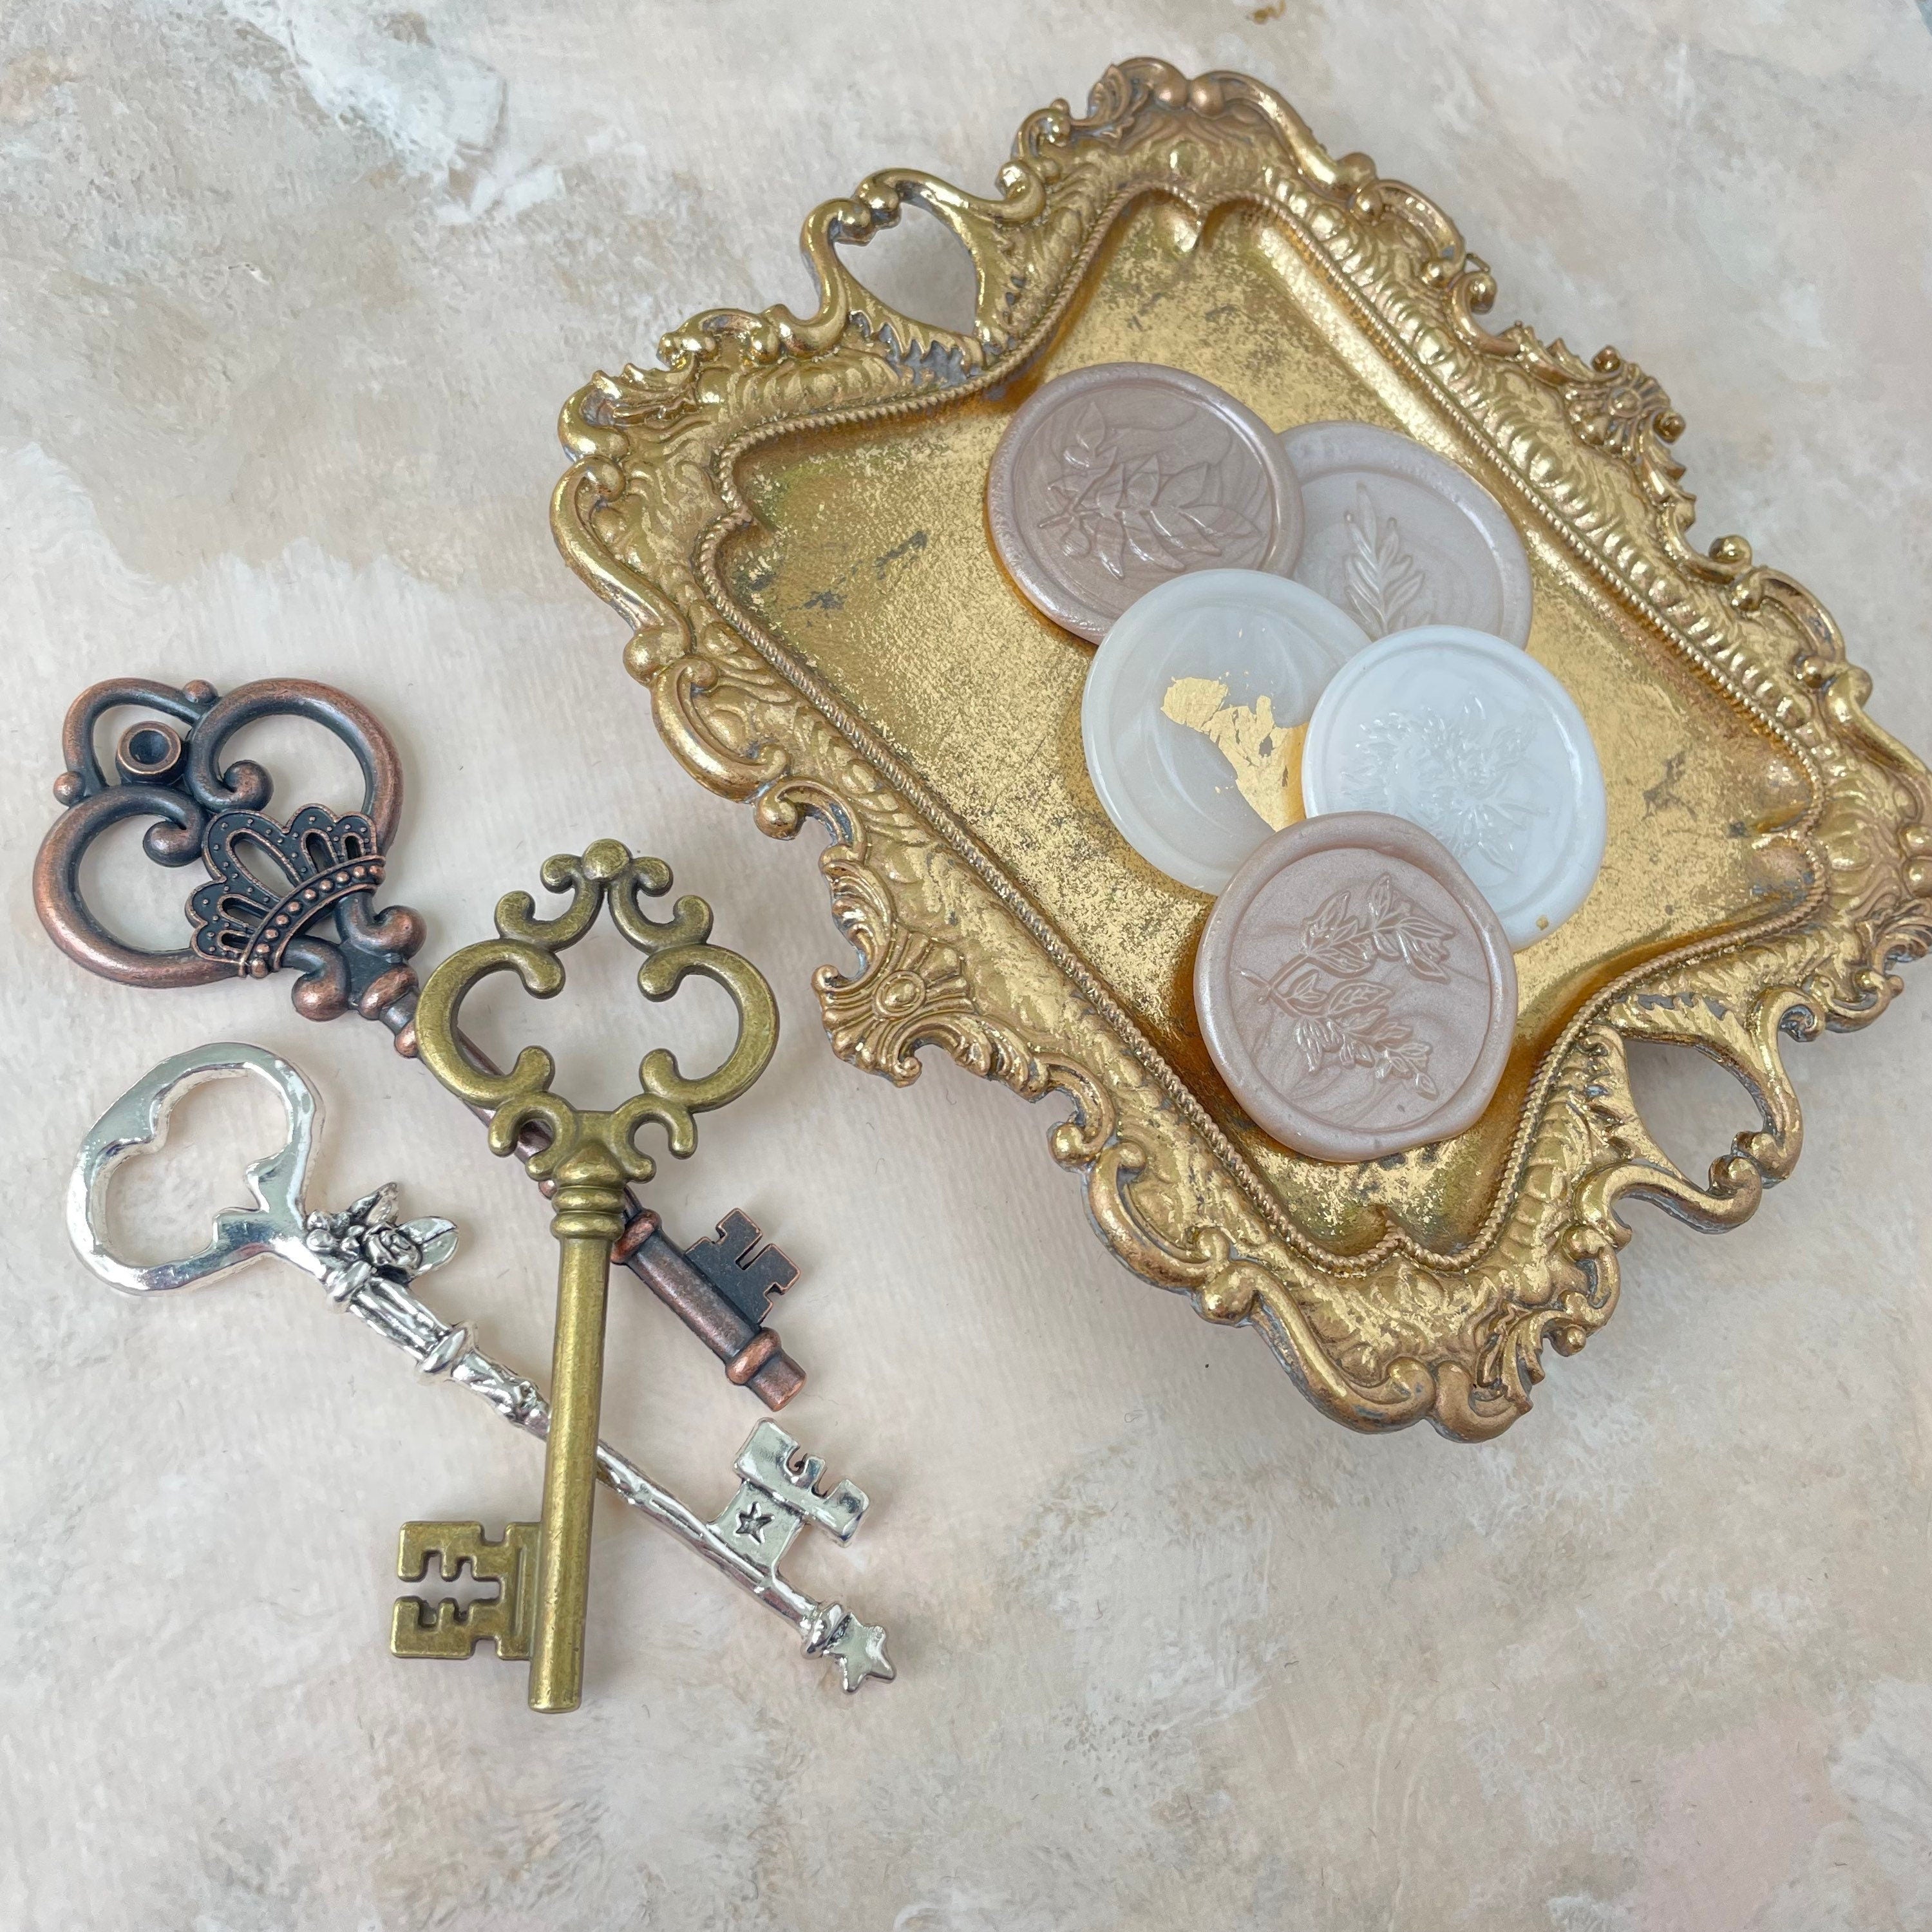 5 champagne and ivory wax seals on gold tray beside one gold key, one bronze key, and one silver key these are must have flat lay props from Champagne & GRIT